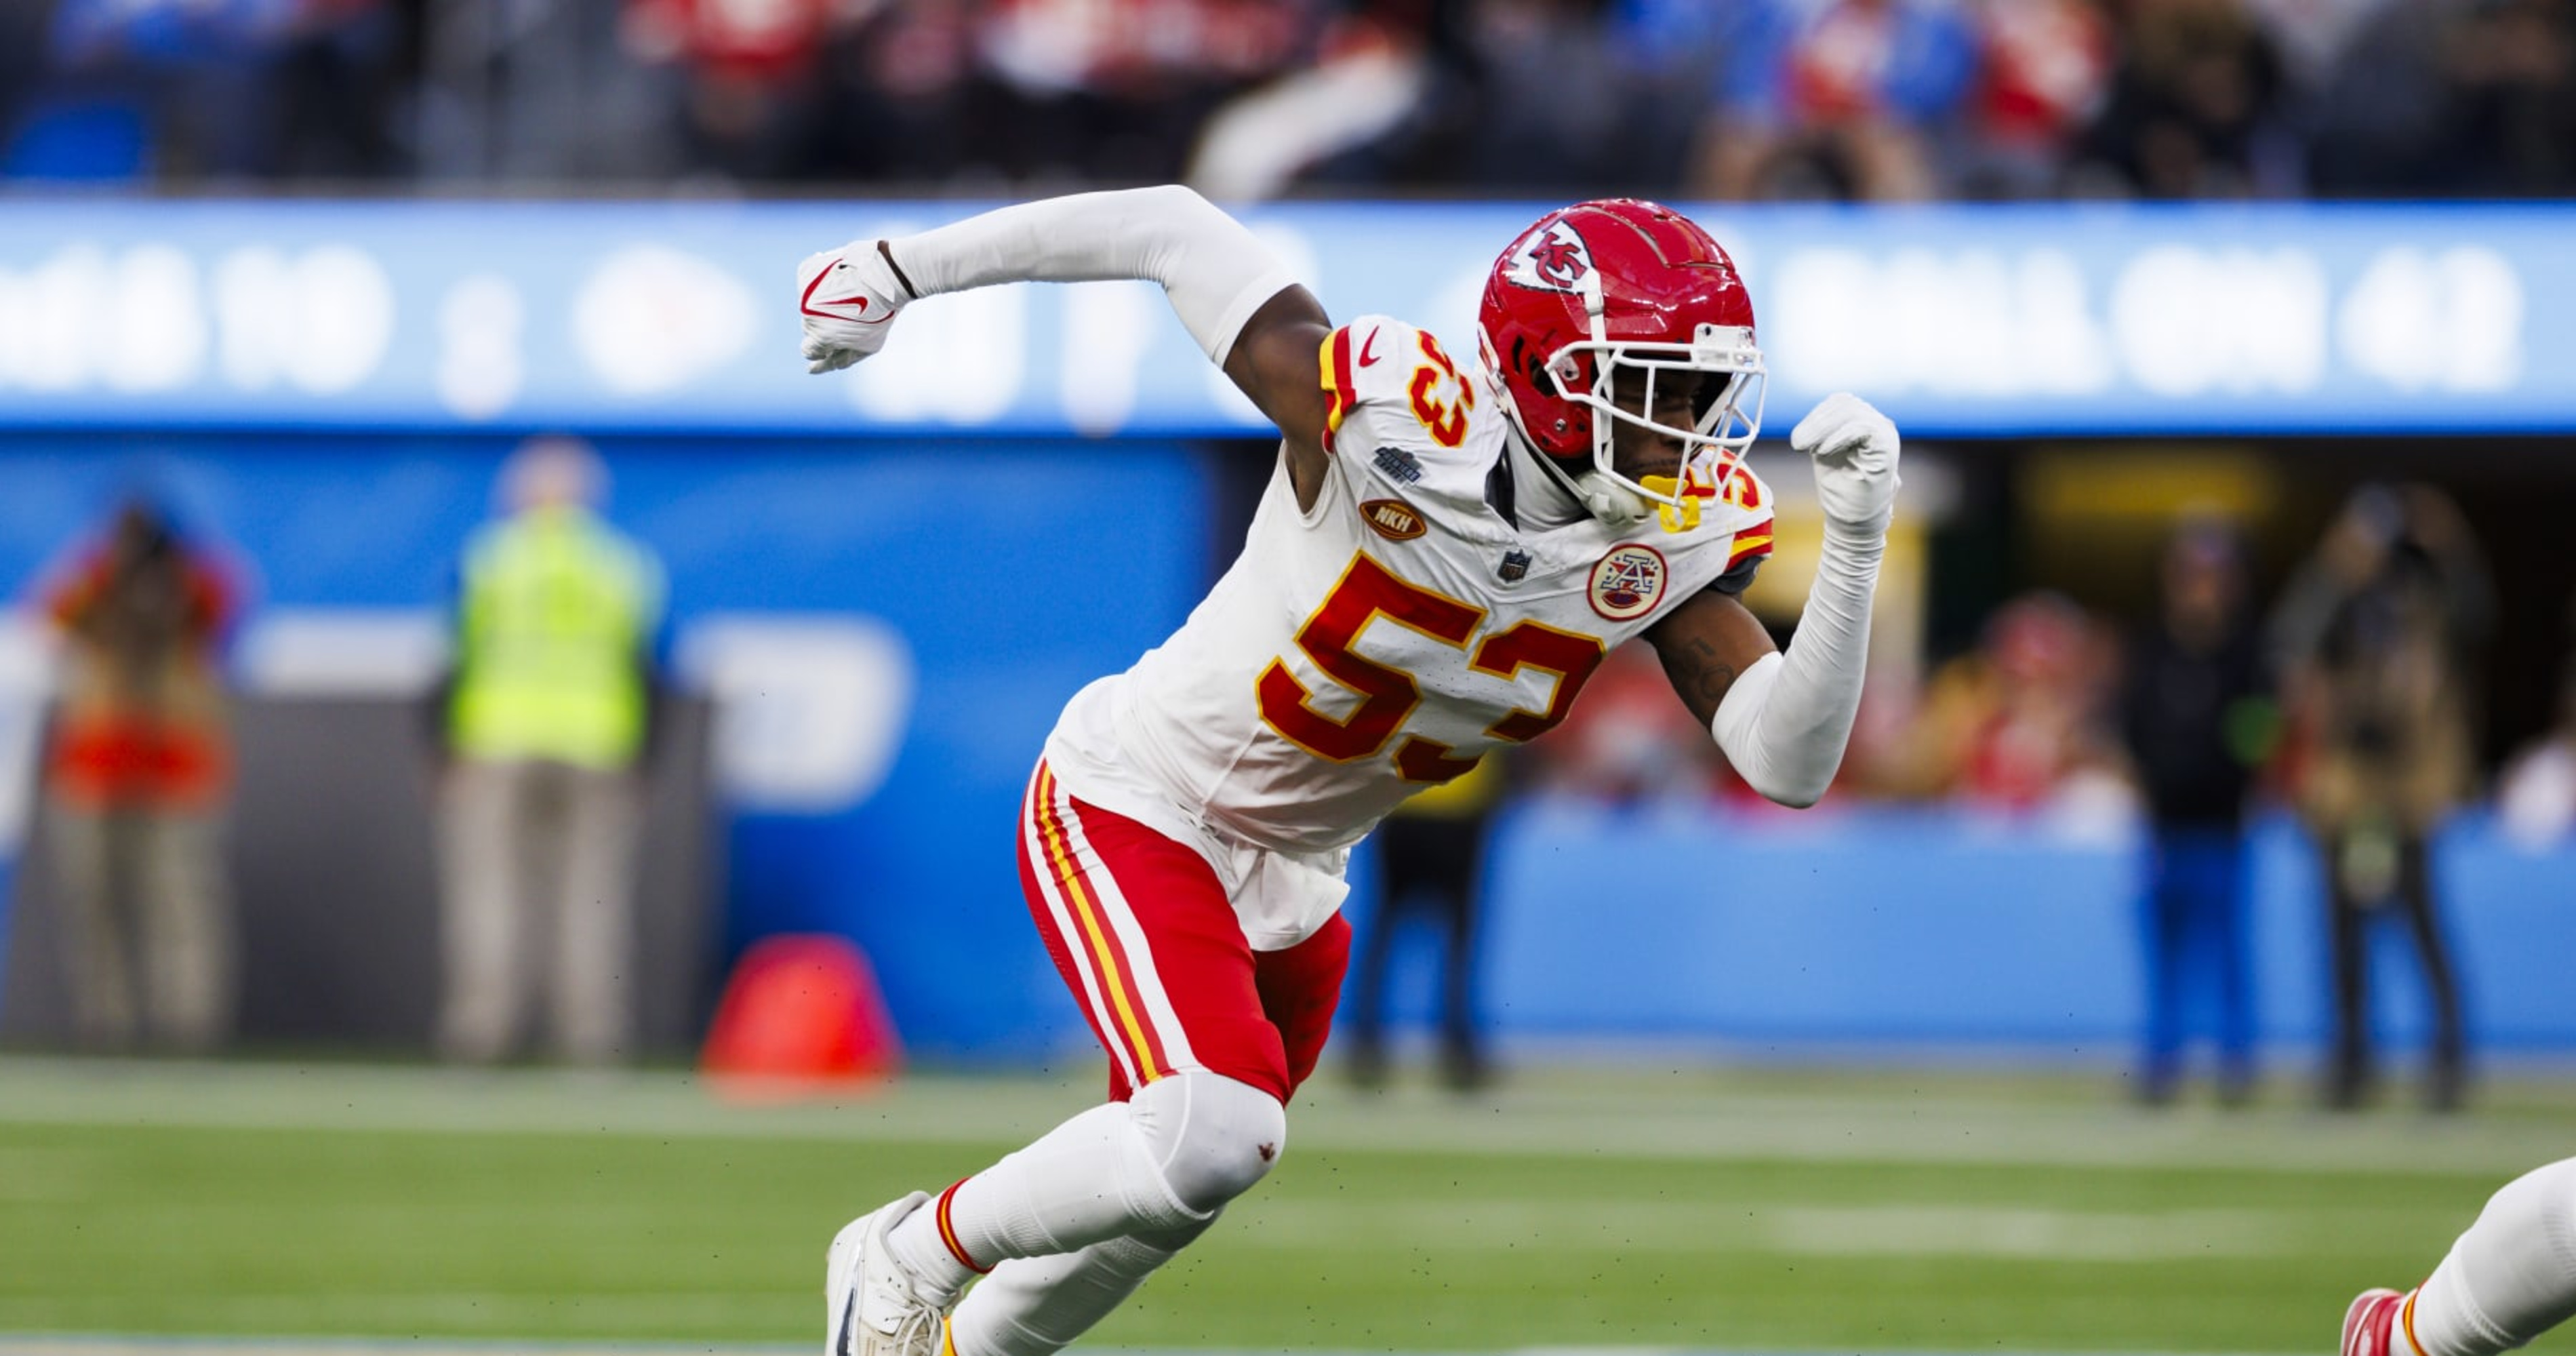 Report: Chiefs' BJ Thompson Suffered Cardiac Arrest, Seizure; Is in Stable Condition